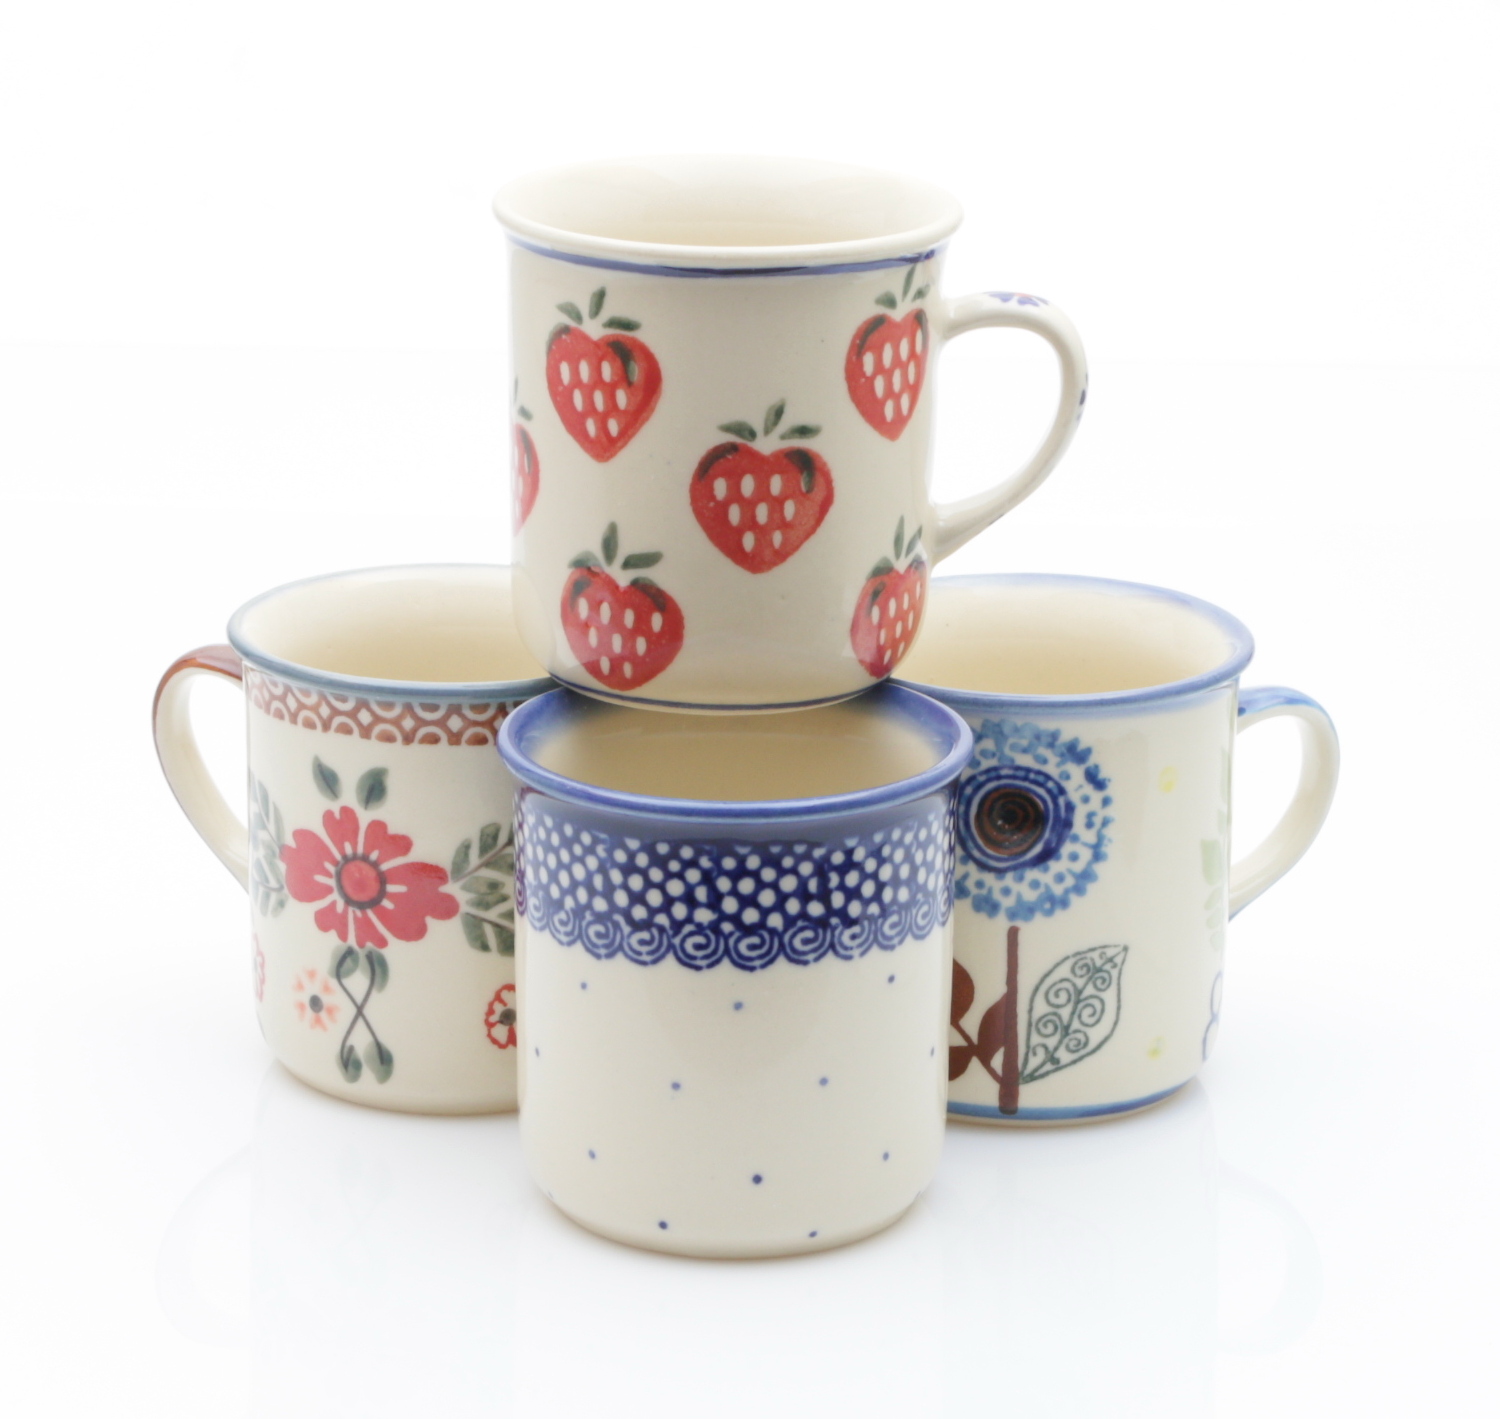 polish cups from Poland